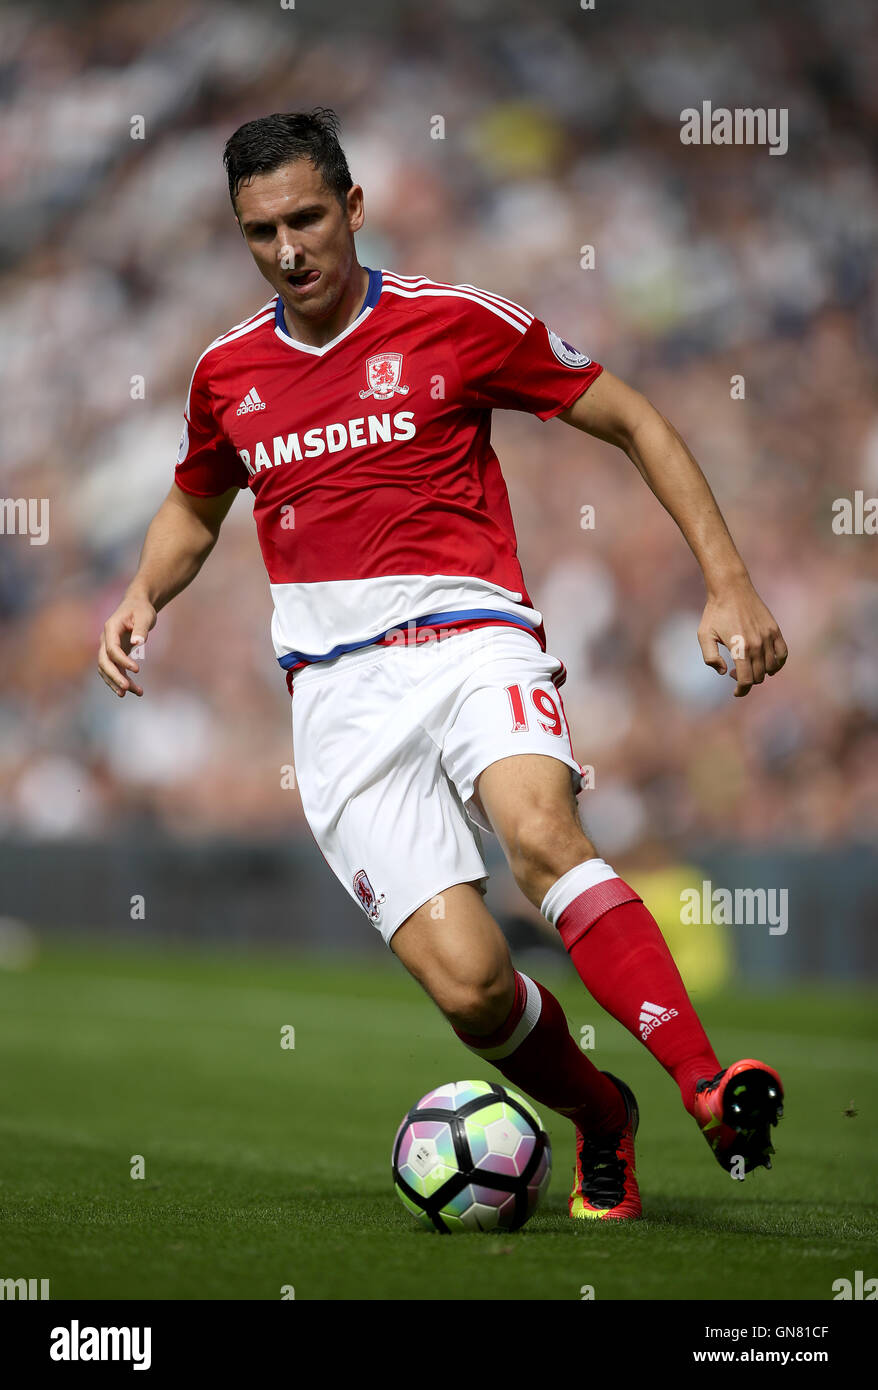 Middlesbrough's Stewart Downing during the Premier League match at The Hawthorns, West Bromwich. PRESS ASSOCIATION Photo. Picture date: Sunday August 28, 2016. See PA story SOCCER West Brom. Photo credit should read: Nick Potts/PA Wire. RESTRICTIONS: No use with unauthorised audio, video, data, fixture lists, club/league logos or 'live' services. Online in-match use limited to 75 images, no video emulation. No use in betting, games or single club/league/player publications. Stock Photo